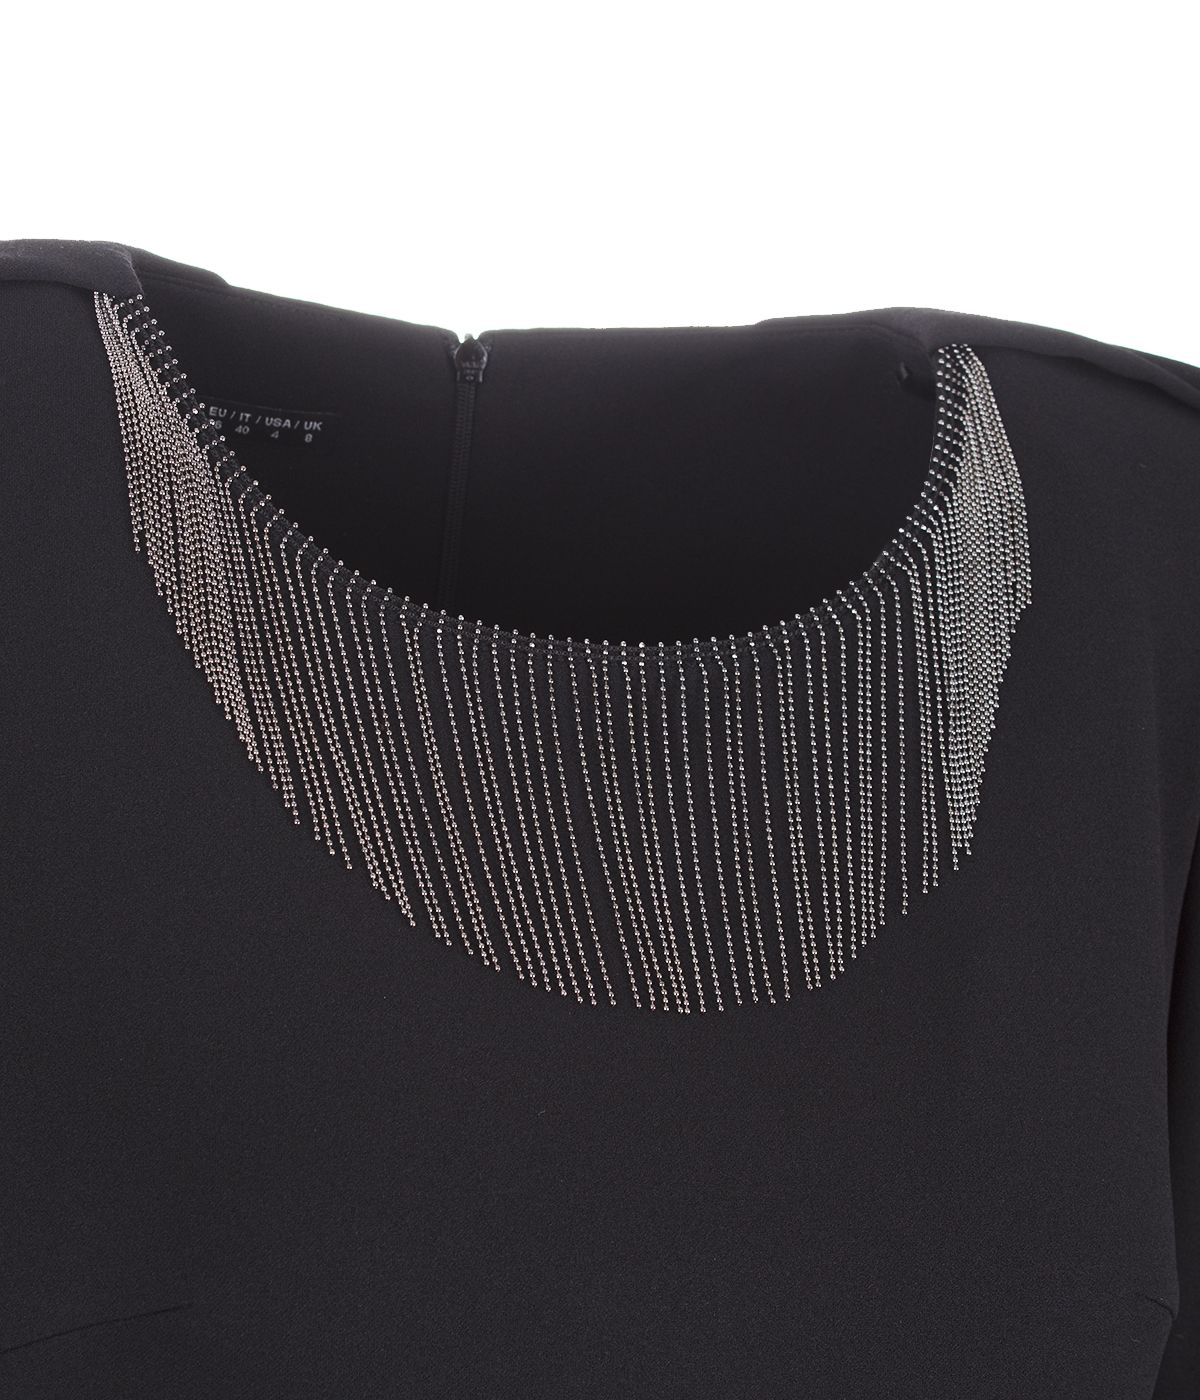 Straigh dress with metallic fringe – necklace type on the neckline area 2